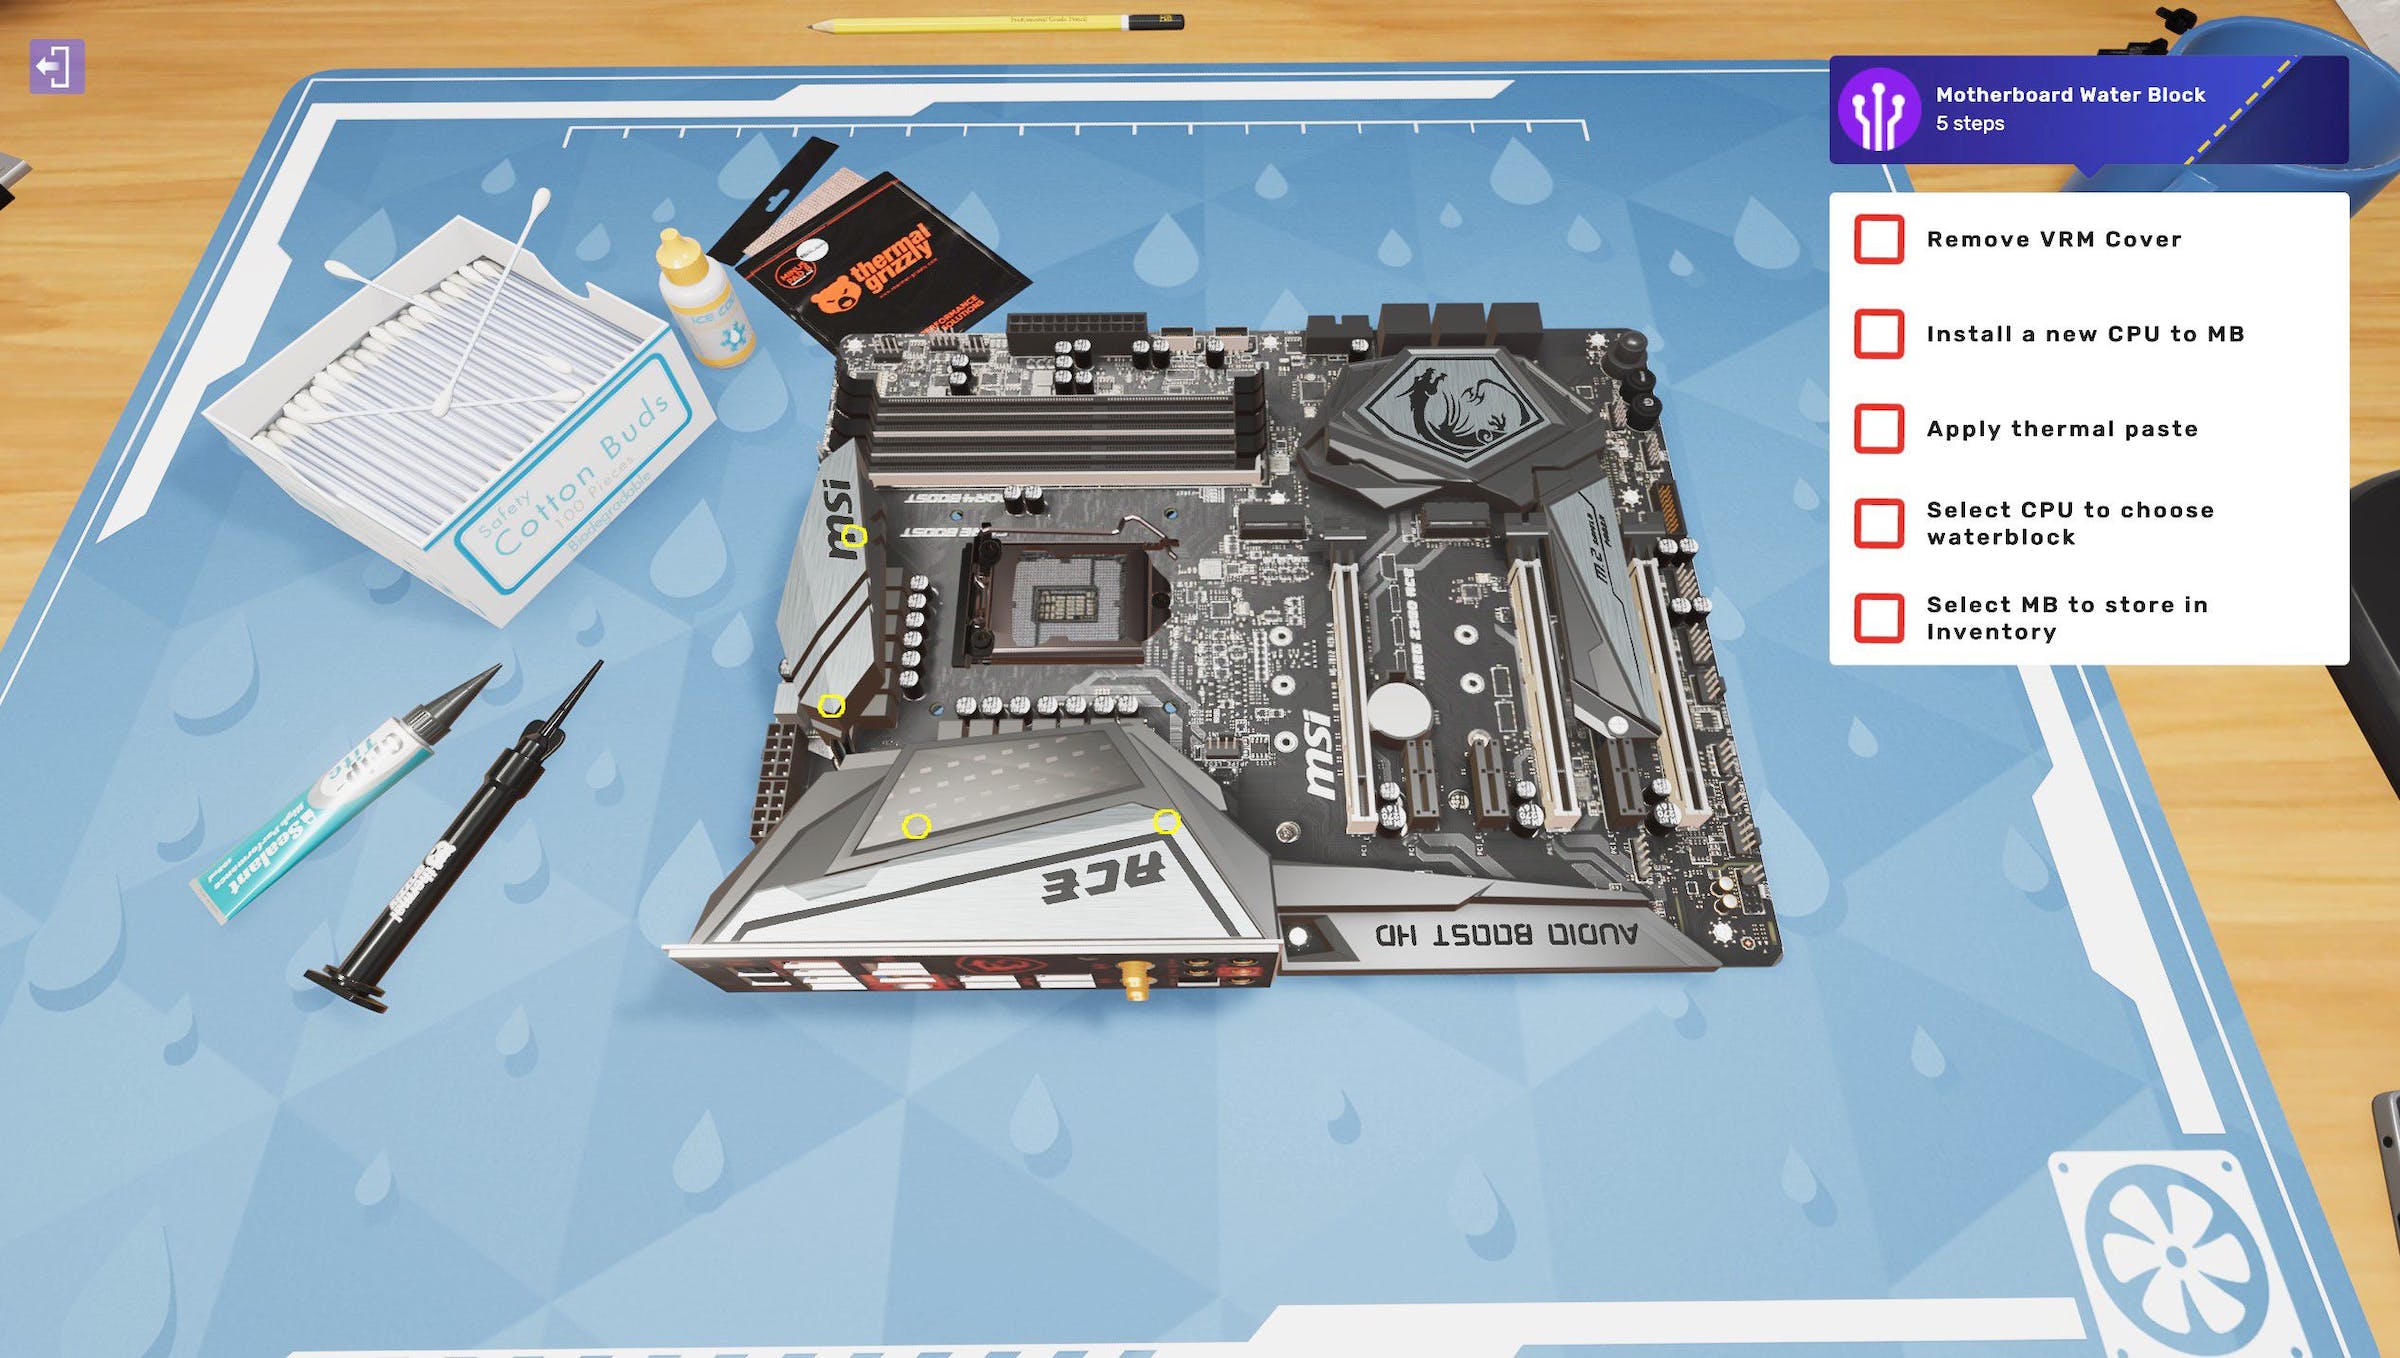 Screenshot of PC Building Simulator 2, showing the process of cooling the motherboard with water.